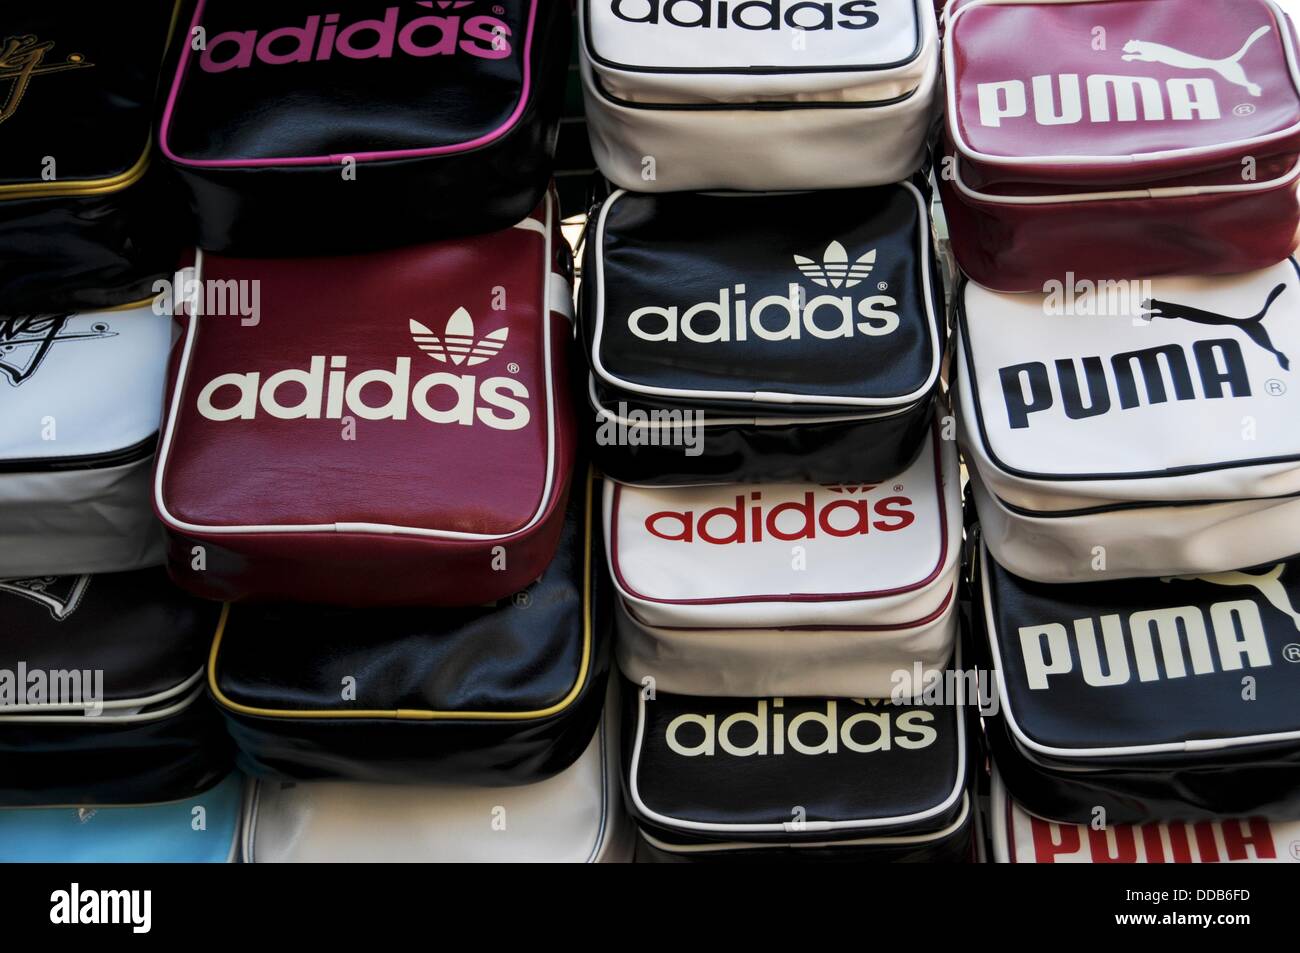 Adidas Fake High Resolution Stock Photography and Images - Alamy